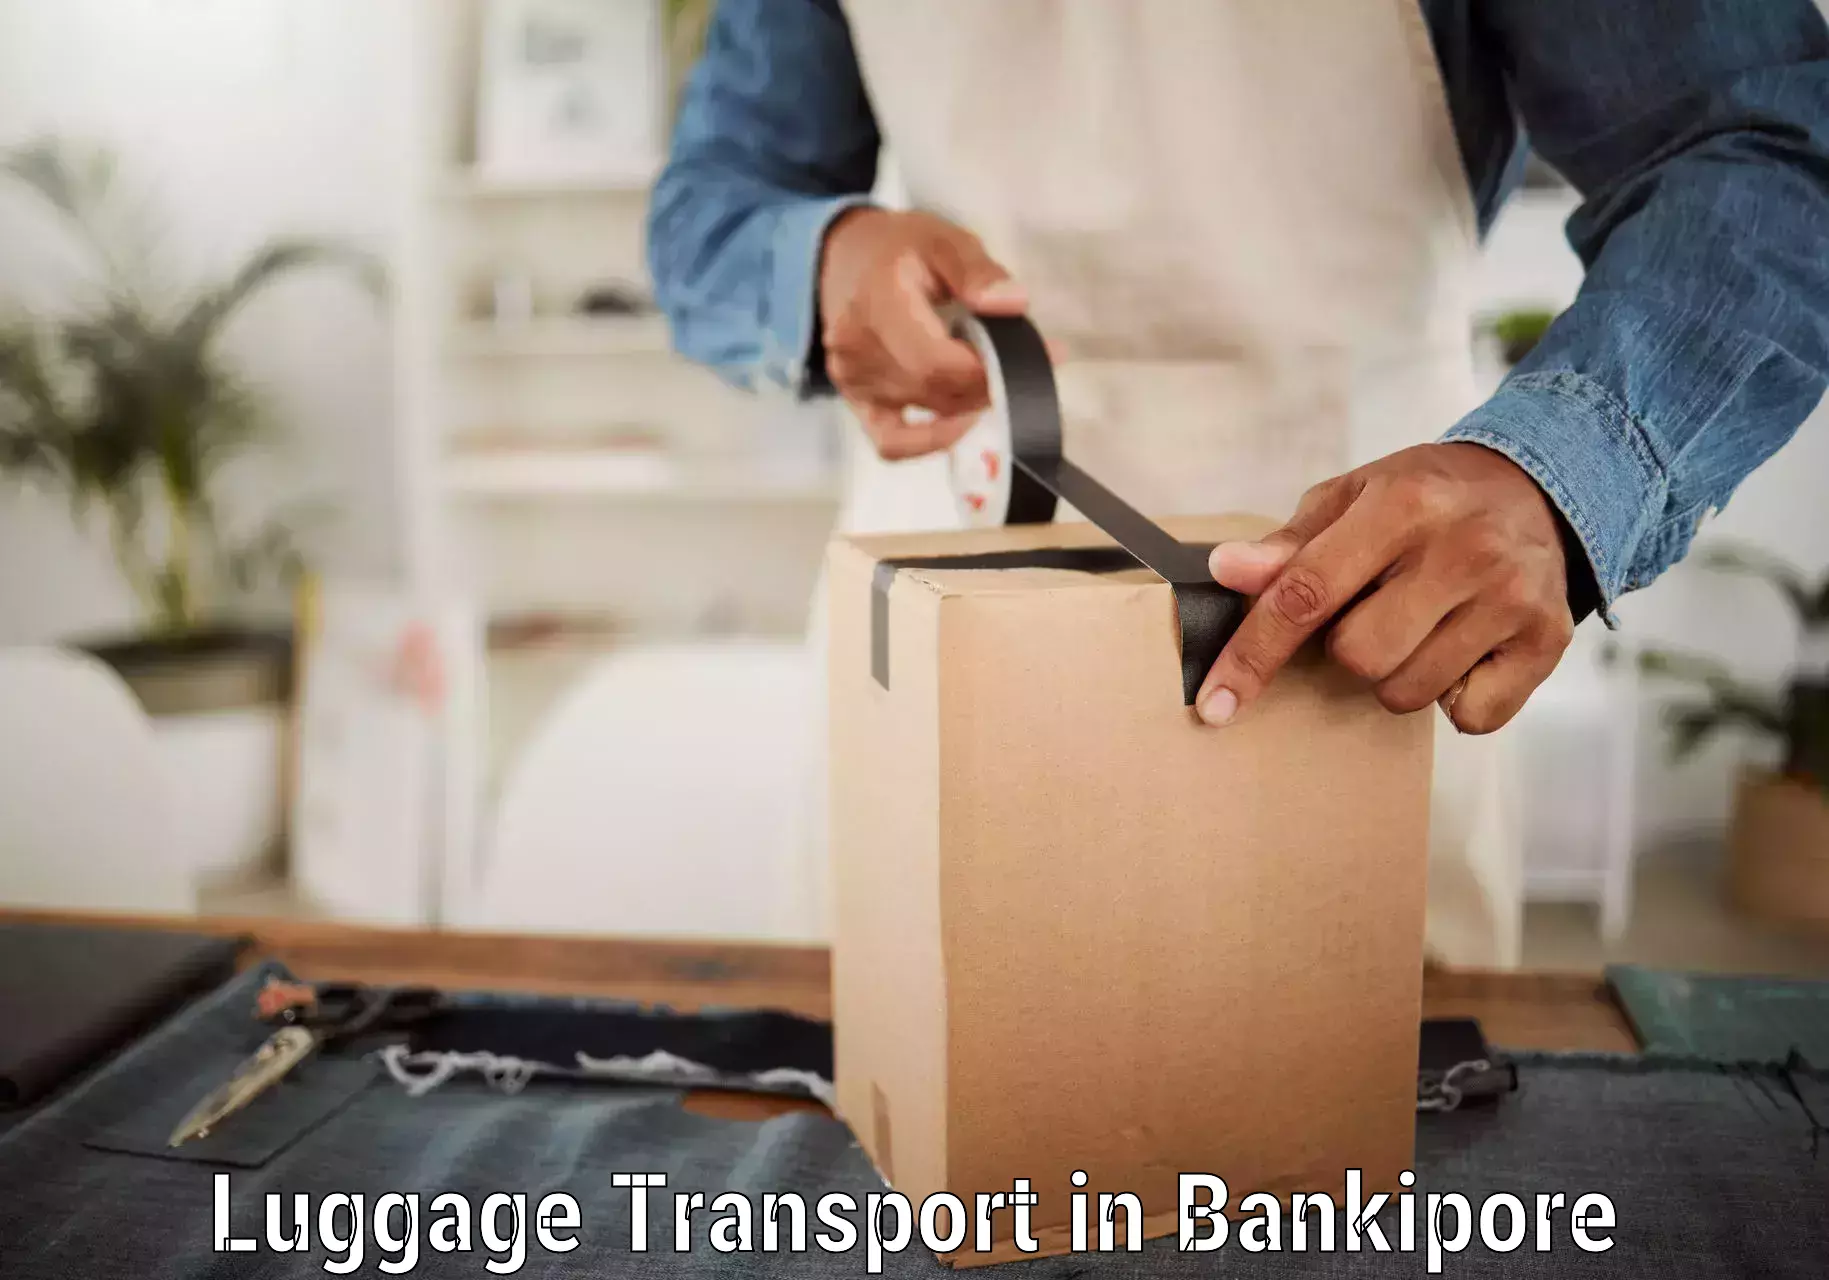 Discounted baggage transport in Bankipore